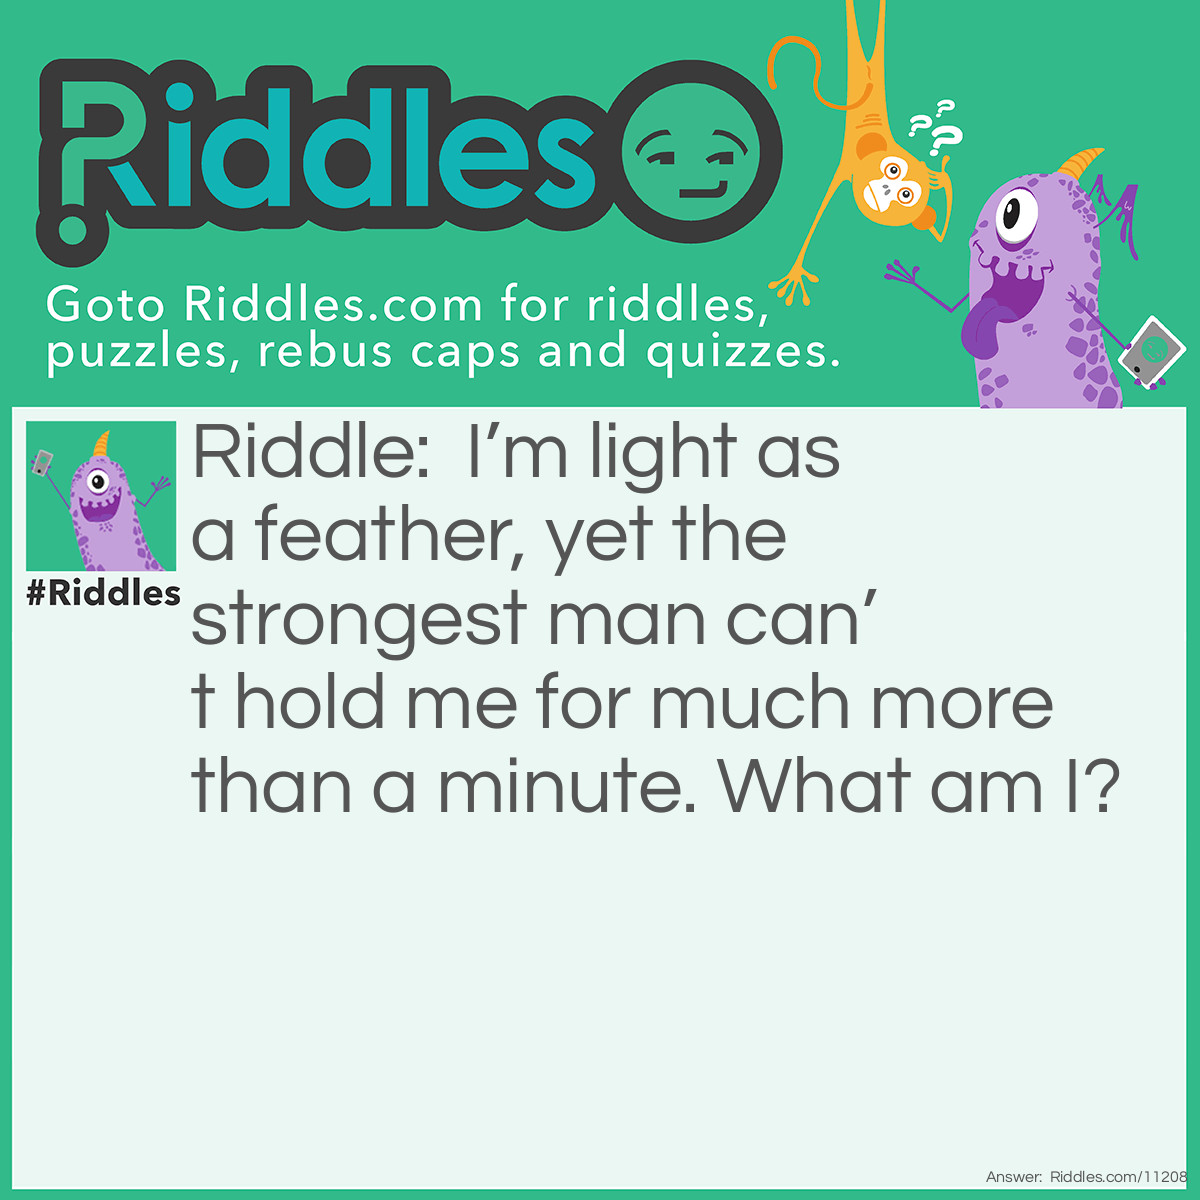 Riddle: I’m light as a feather, yet the strongest man can’t hold me for much more than a minute. What am I? Answer: The answer is breath! You can hold your breath for a short time, but not for very long.